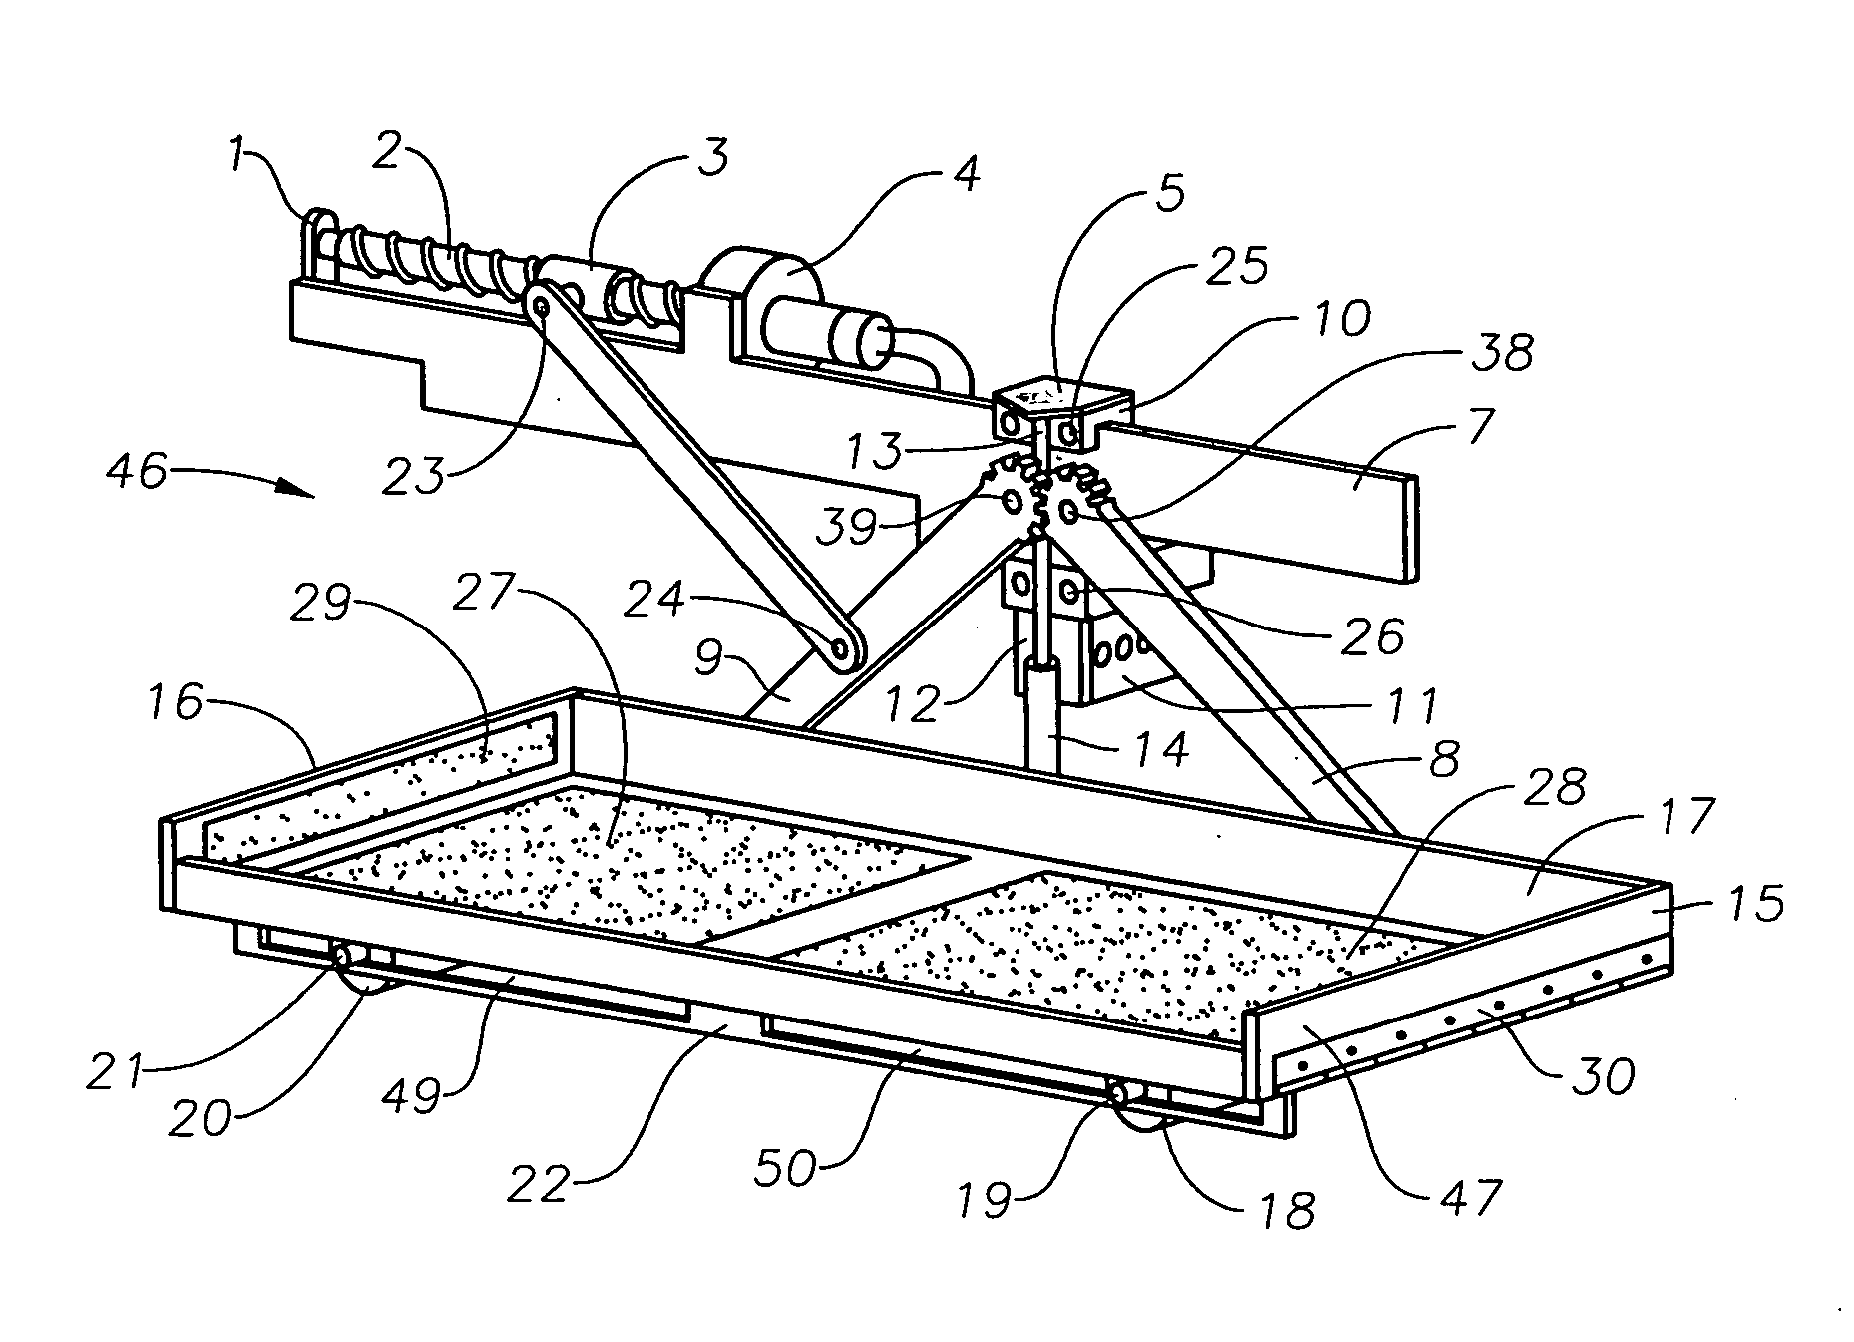 Apparatus and method for lifting and carrying objects on a vehicle